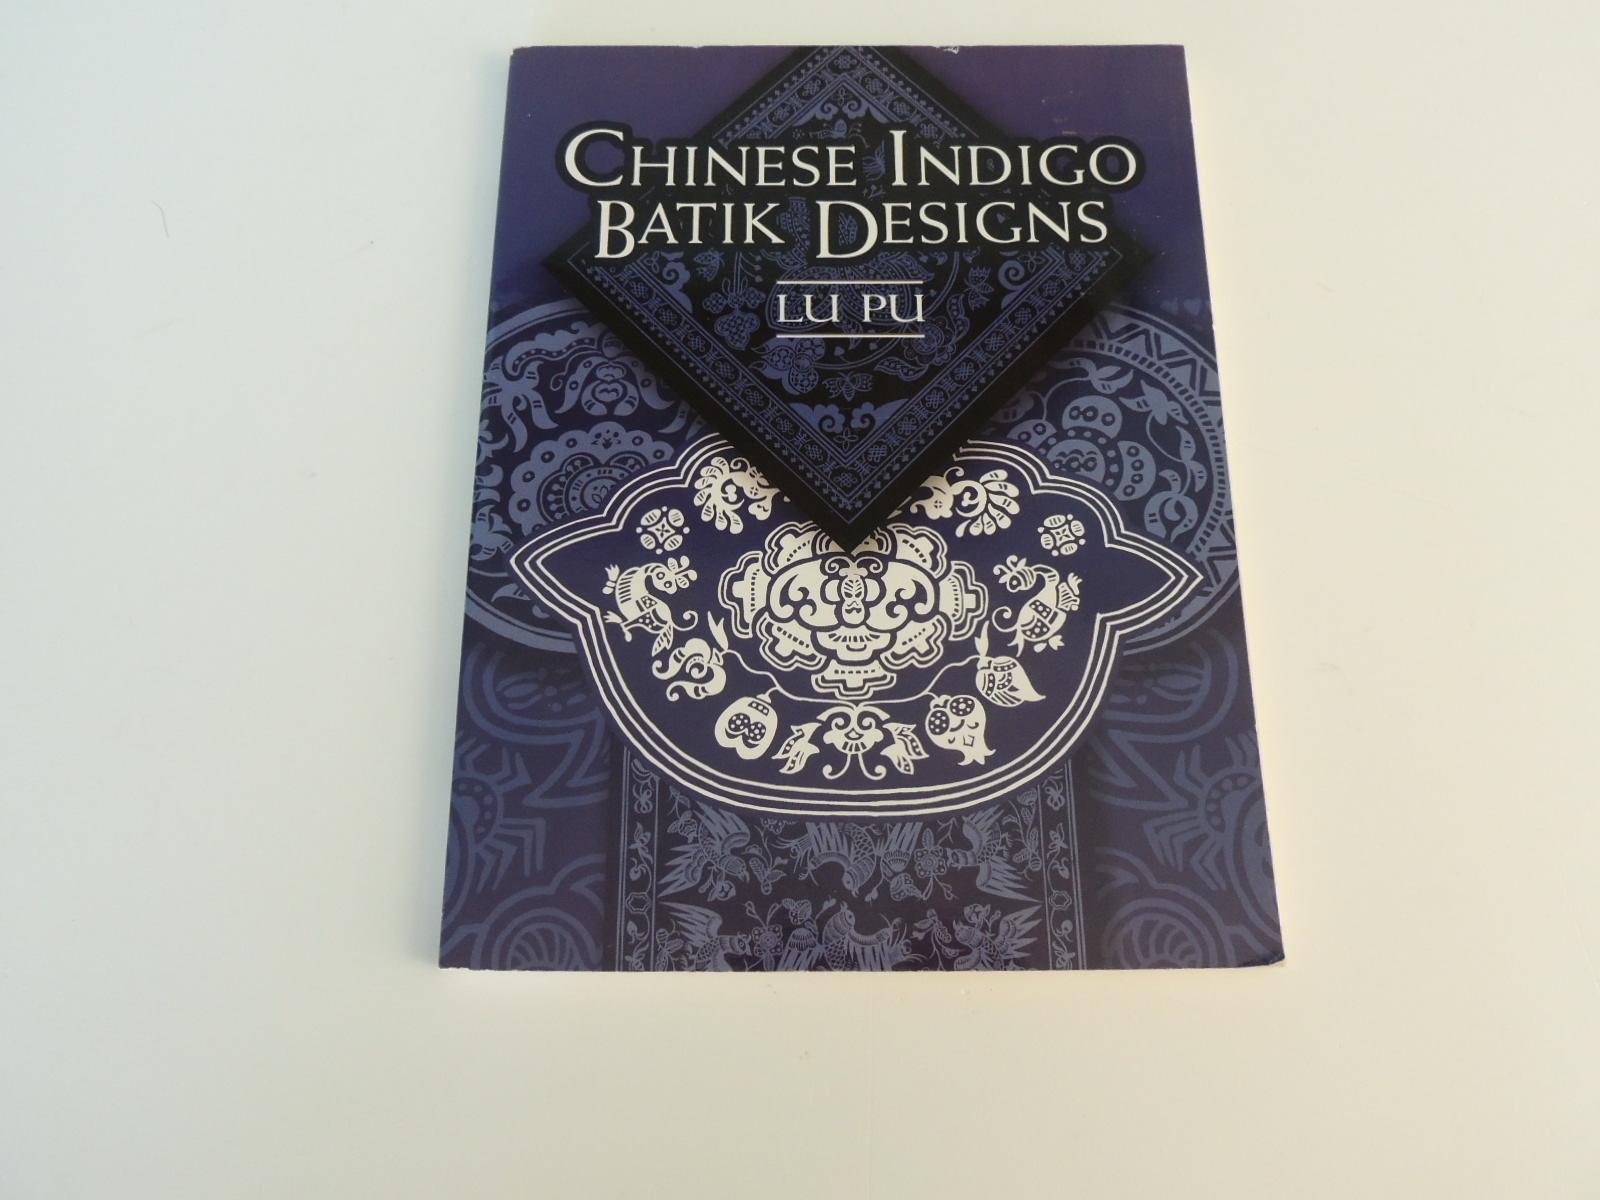 Chinese Indigo Batik Designs
Showcasing more than 110 carefully reproduced illustrations from a rare, early collection of batik art — also known as wax-resist dyeing — this volume bursts with strong native flavor. Produced in China's remote